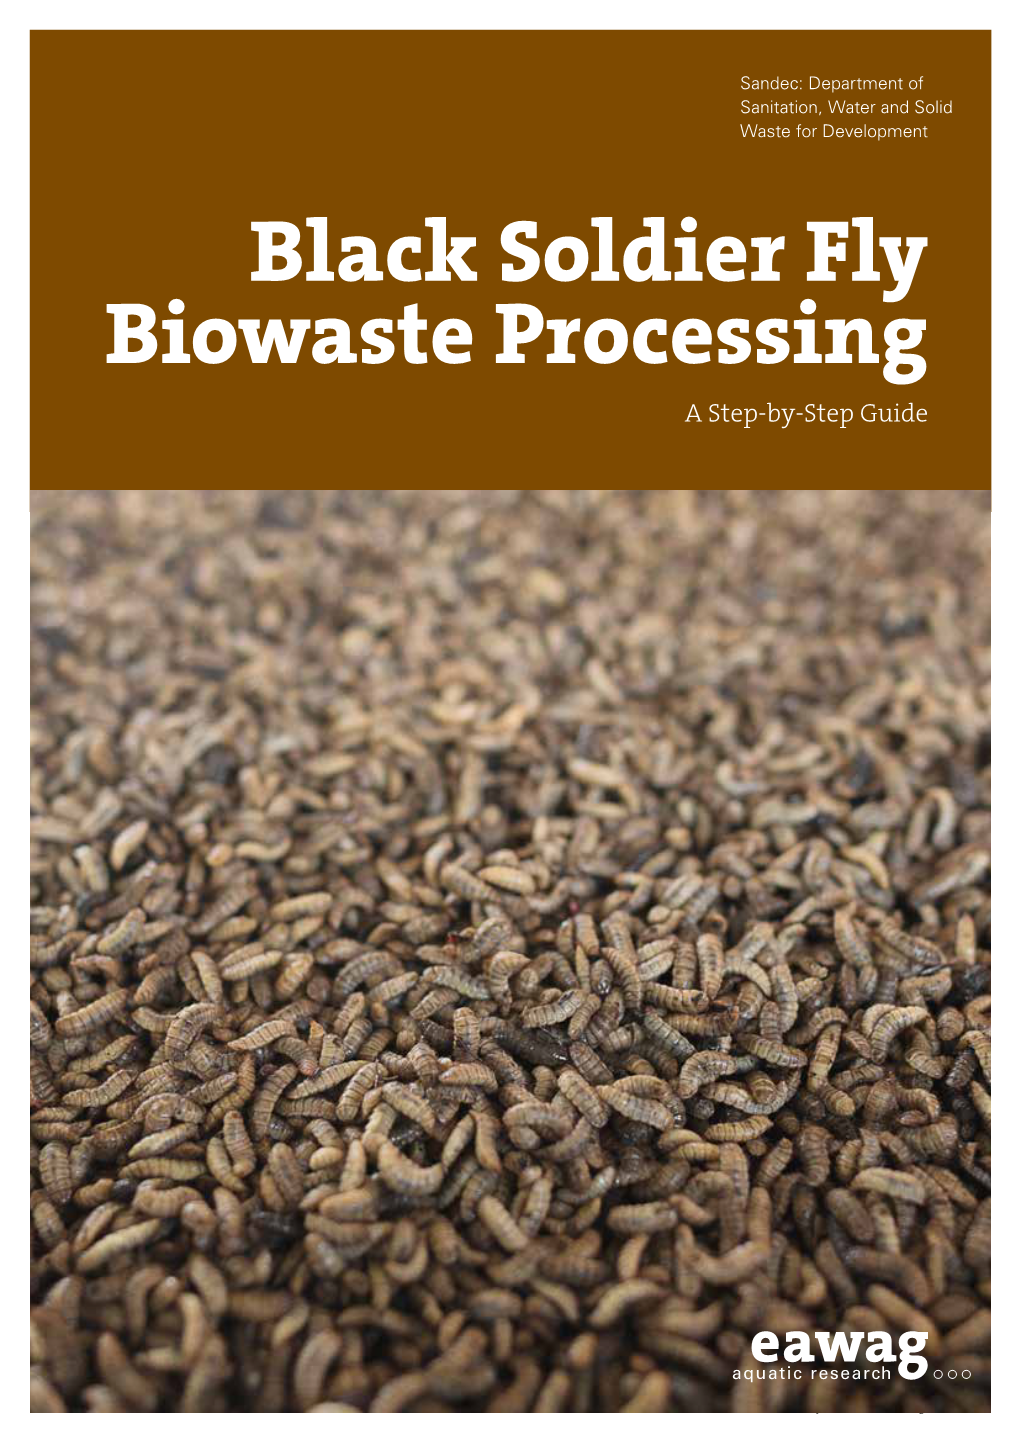 Black Soldier Fly Biowaste Processing a Step-By-Step Guide